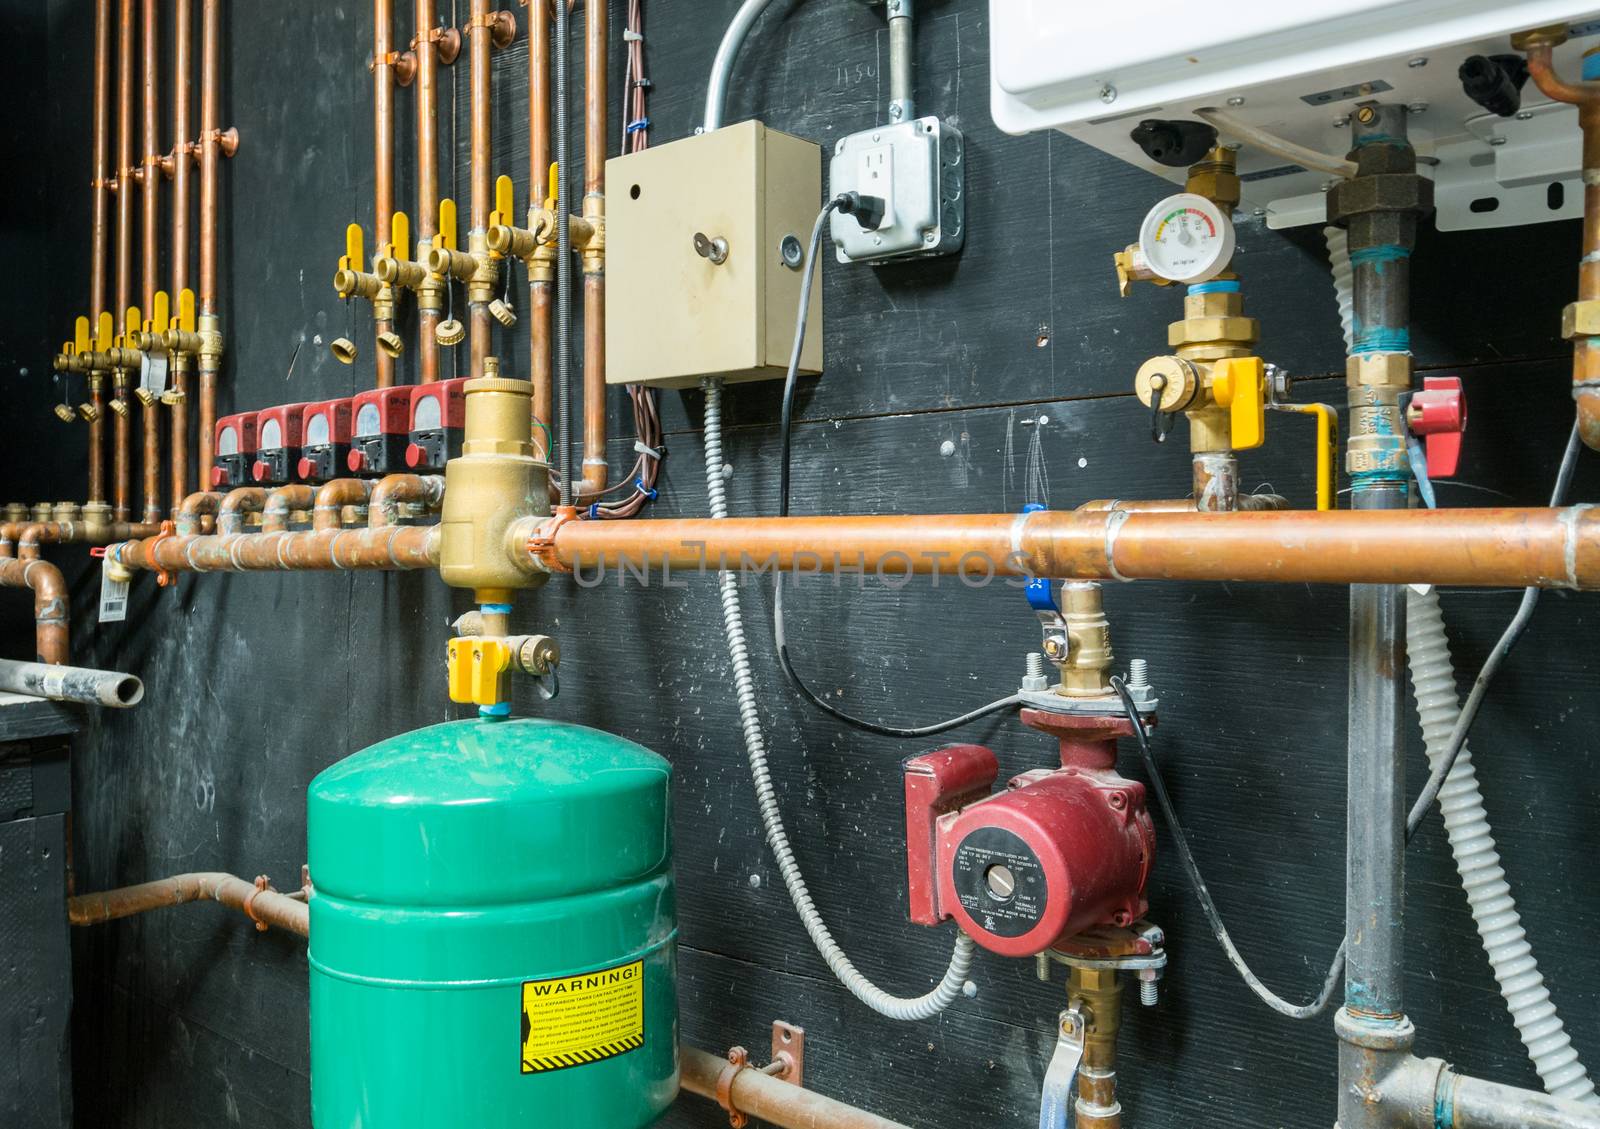 Copper pipes and valves with control unit mounted on the wall